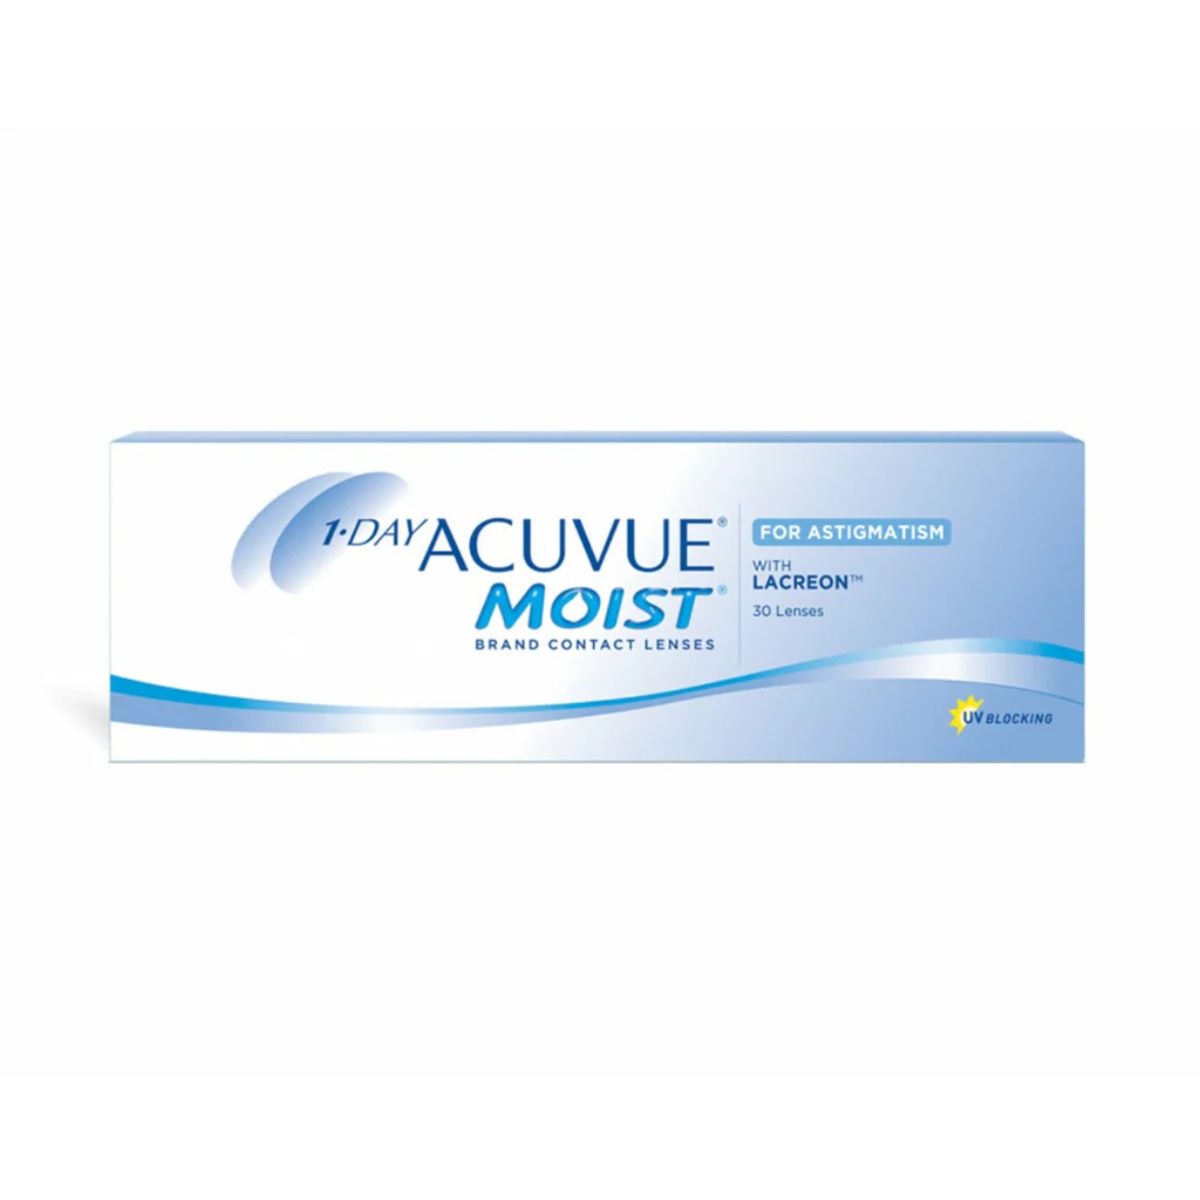 "Buy 1-Day Acuvue Moist For Astigmatism (30 Lens Pack) Contact Lenses"